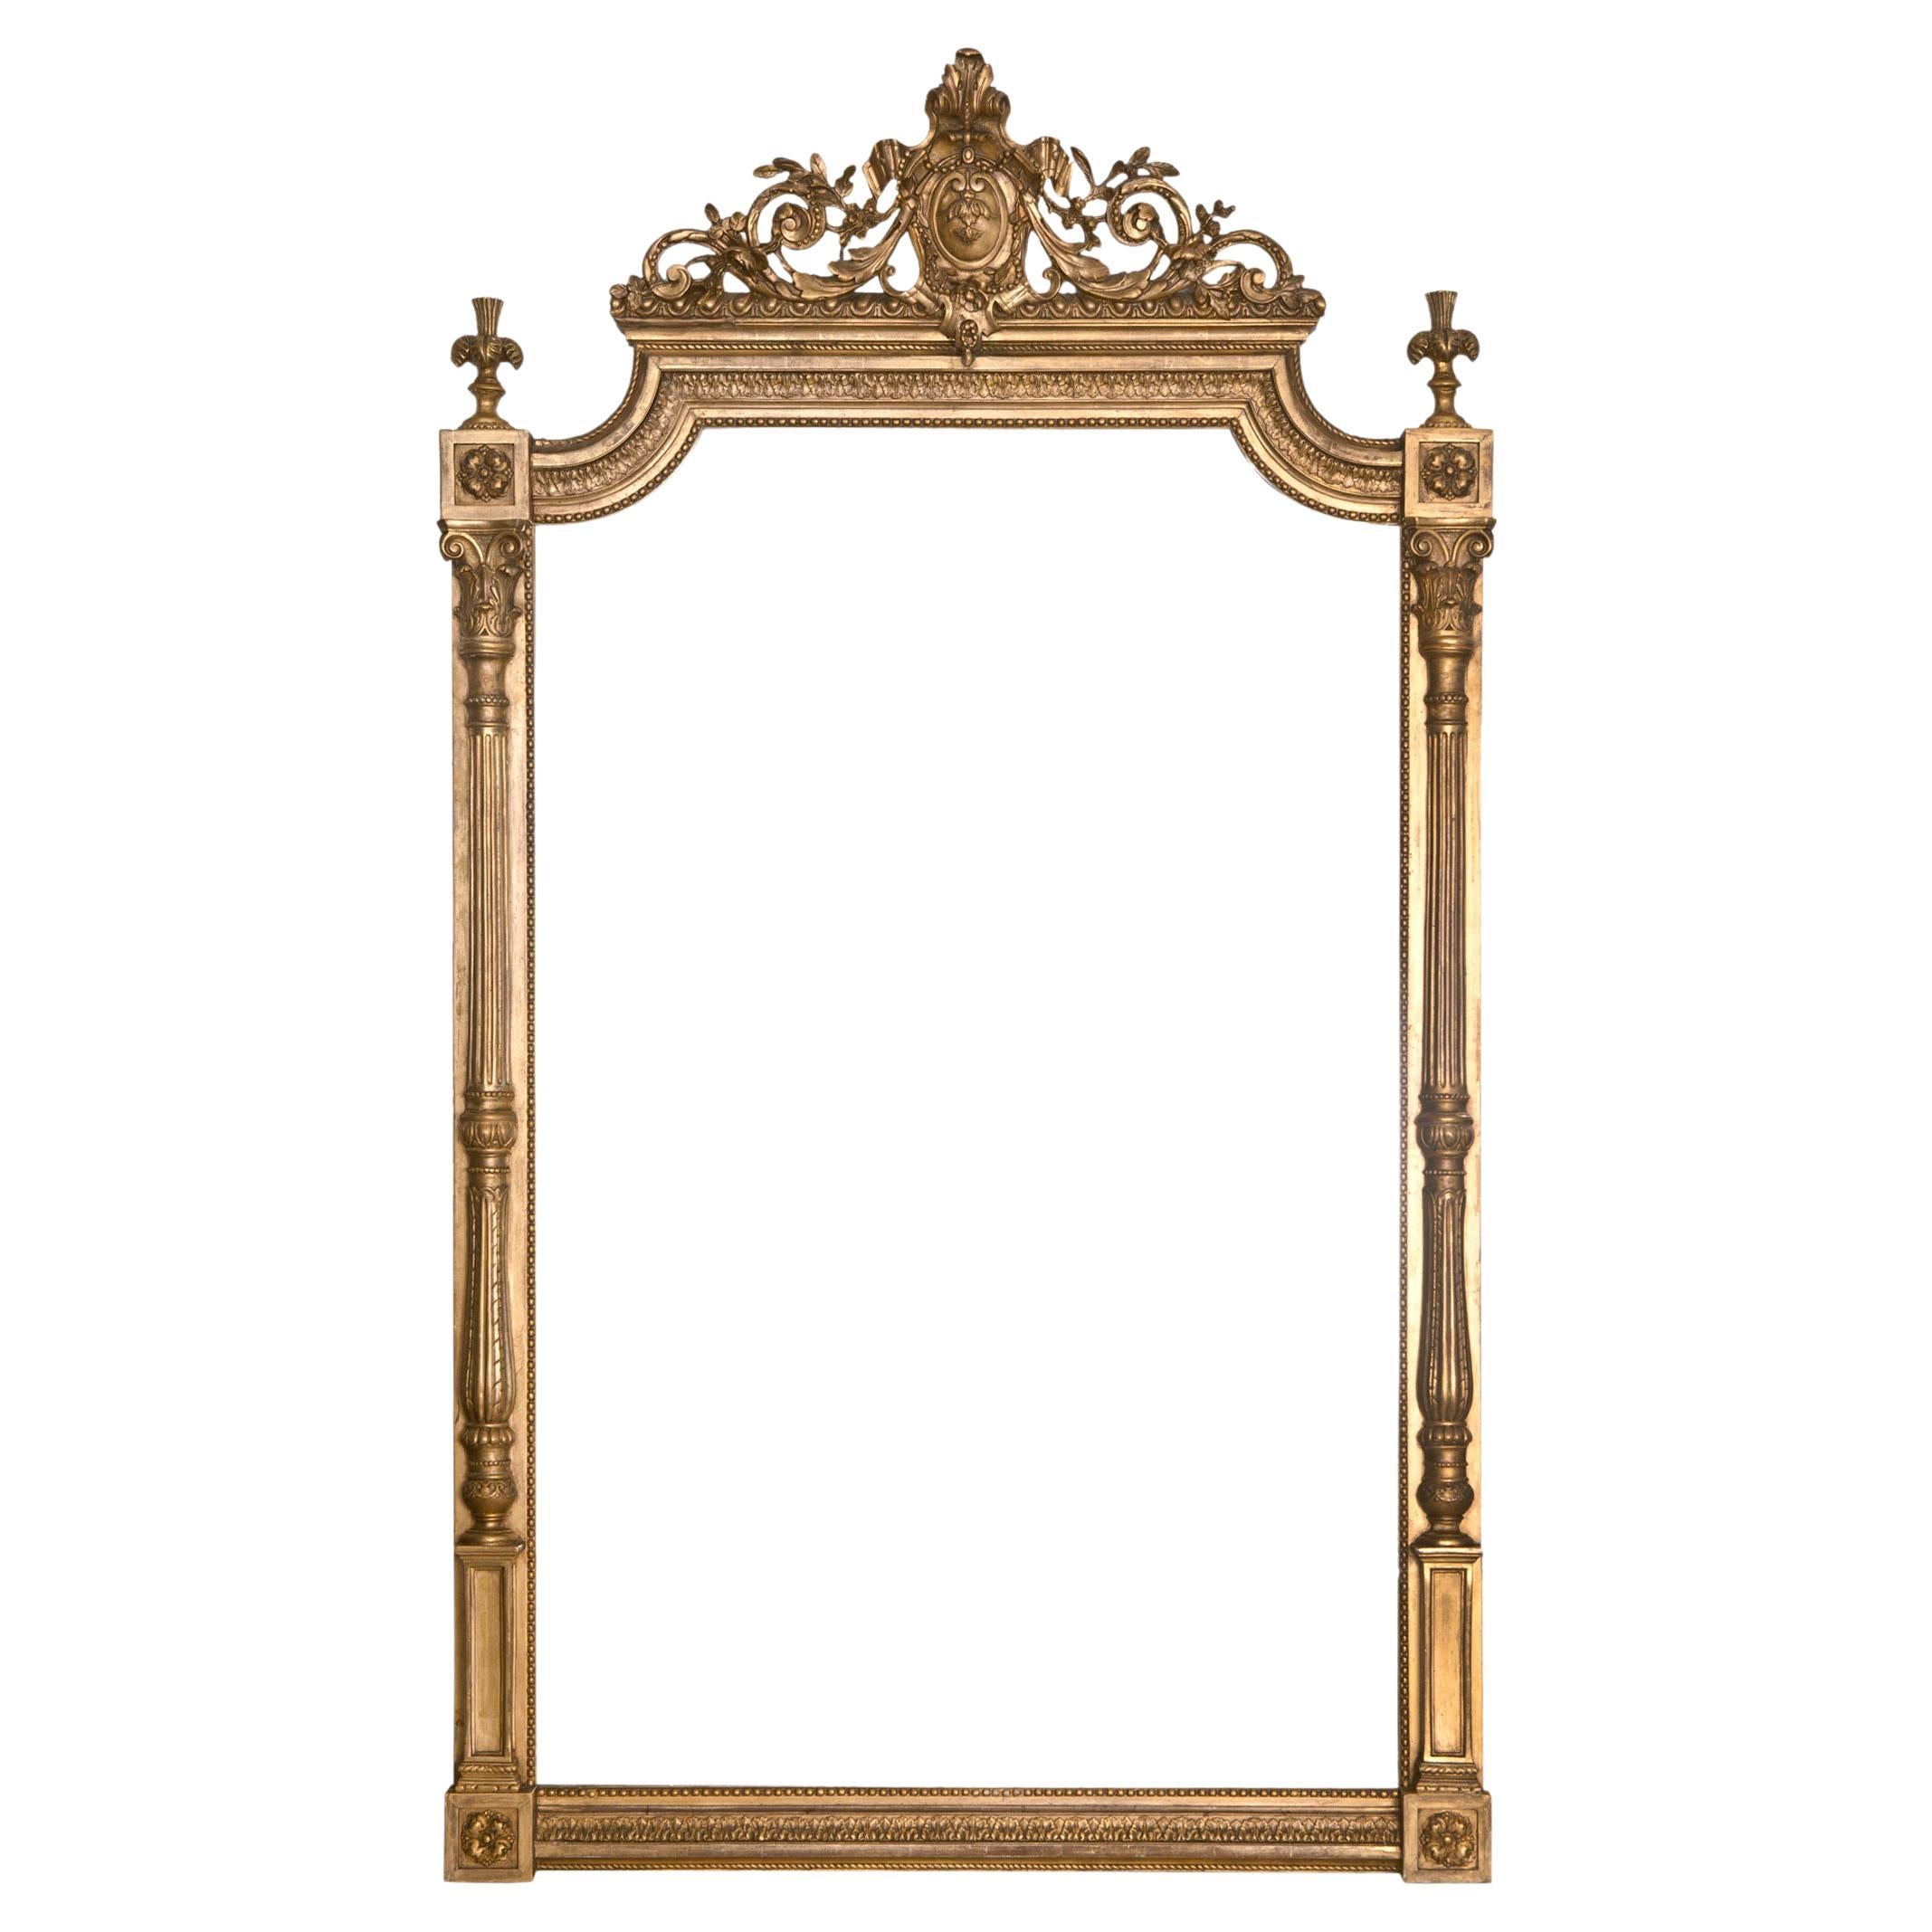 This magnificent giltwood mantle mirror is intricately carved with columns, medallions & delicate scrolls. The mirror & frame are as beautiful condition for the age. A stunning example of the period.